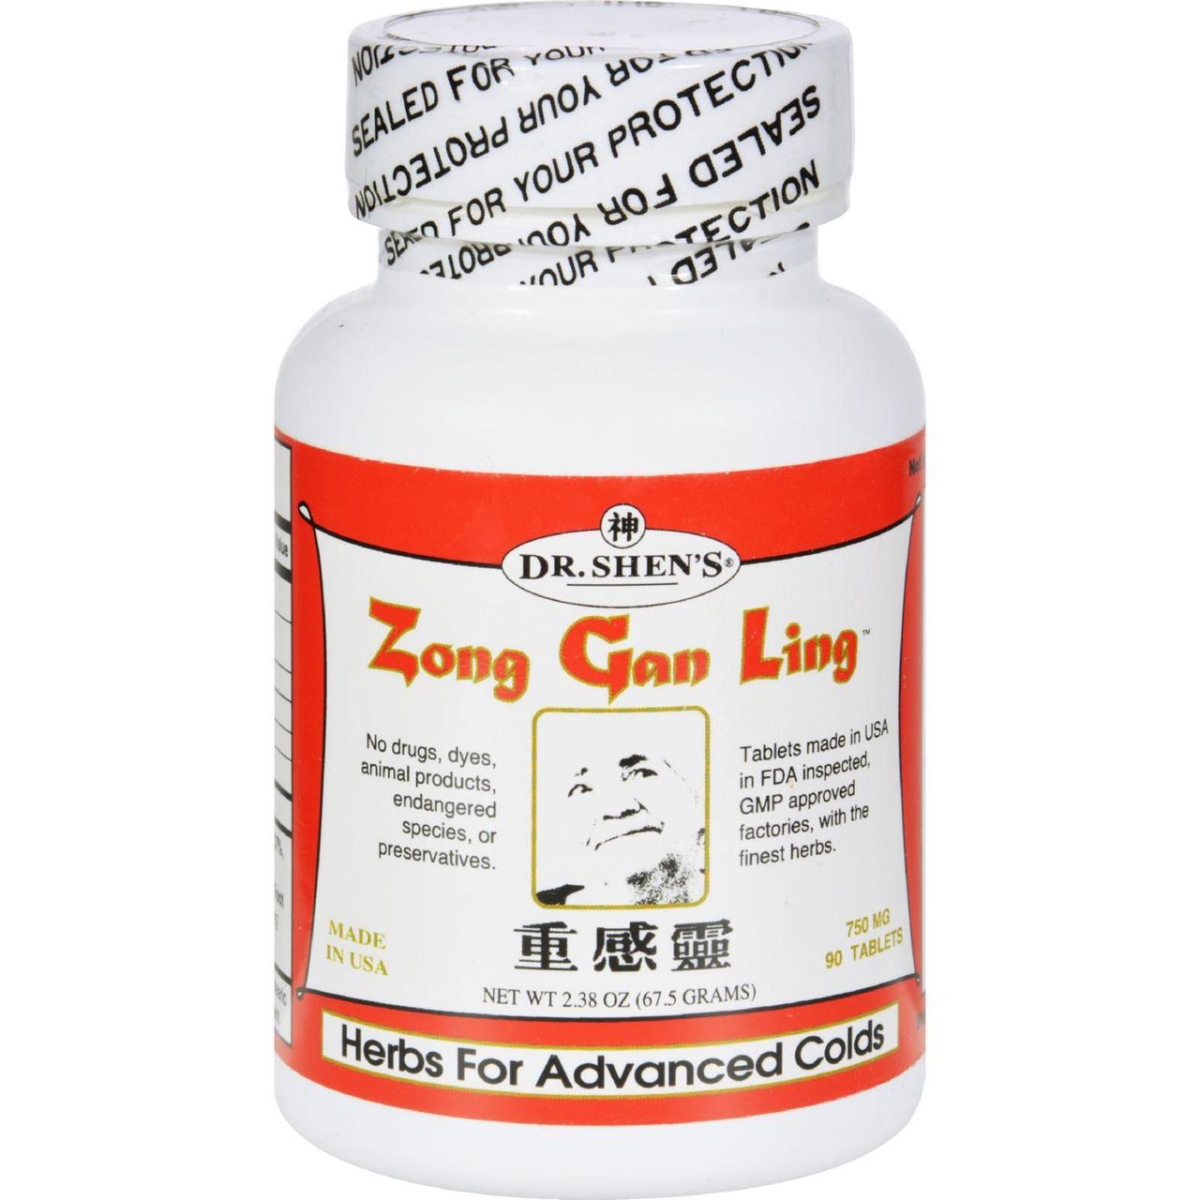 Hg0934919 750 Mg Zong Gan Ling Severe Cold & Flu Relief, 90 Tablets